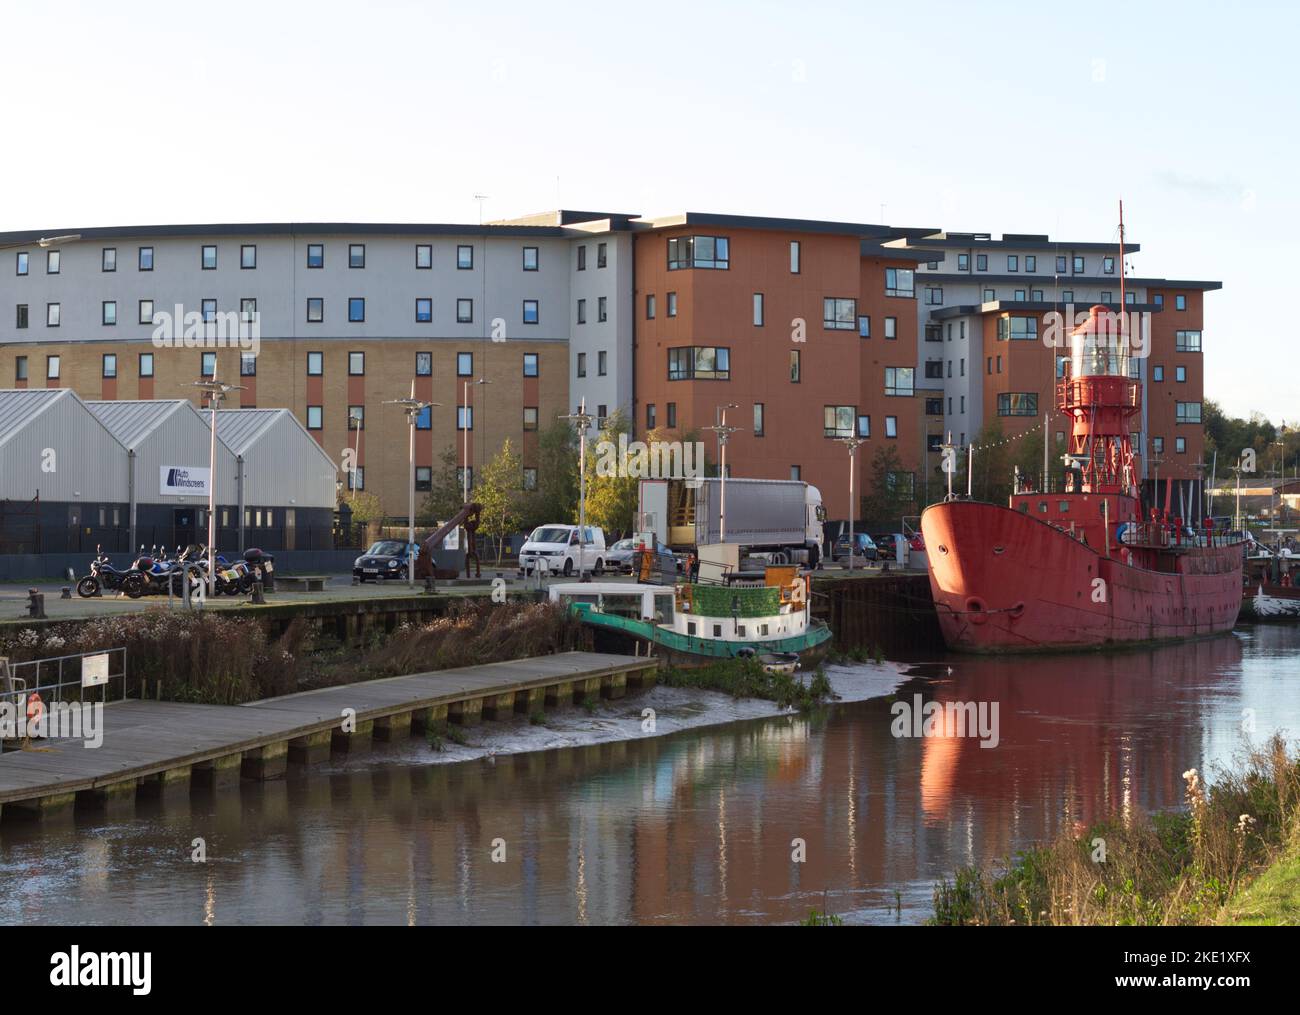 The Maltings student accommodation around Hythe Quay in Colchester, Essex with the TS Colne Lightship vessel moored in the River Colne. Stock Photo